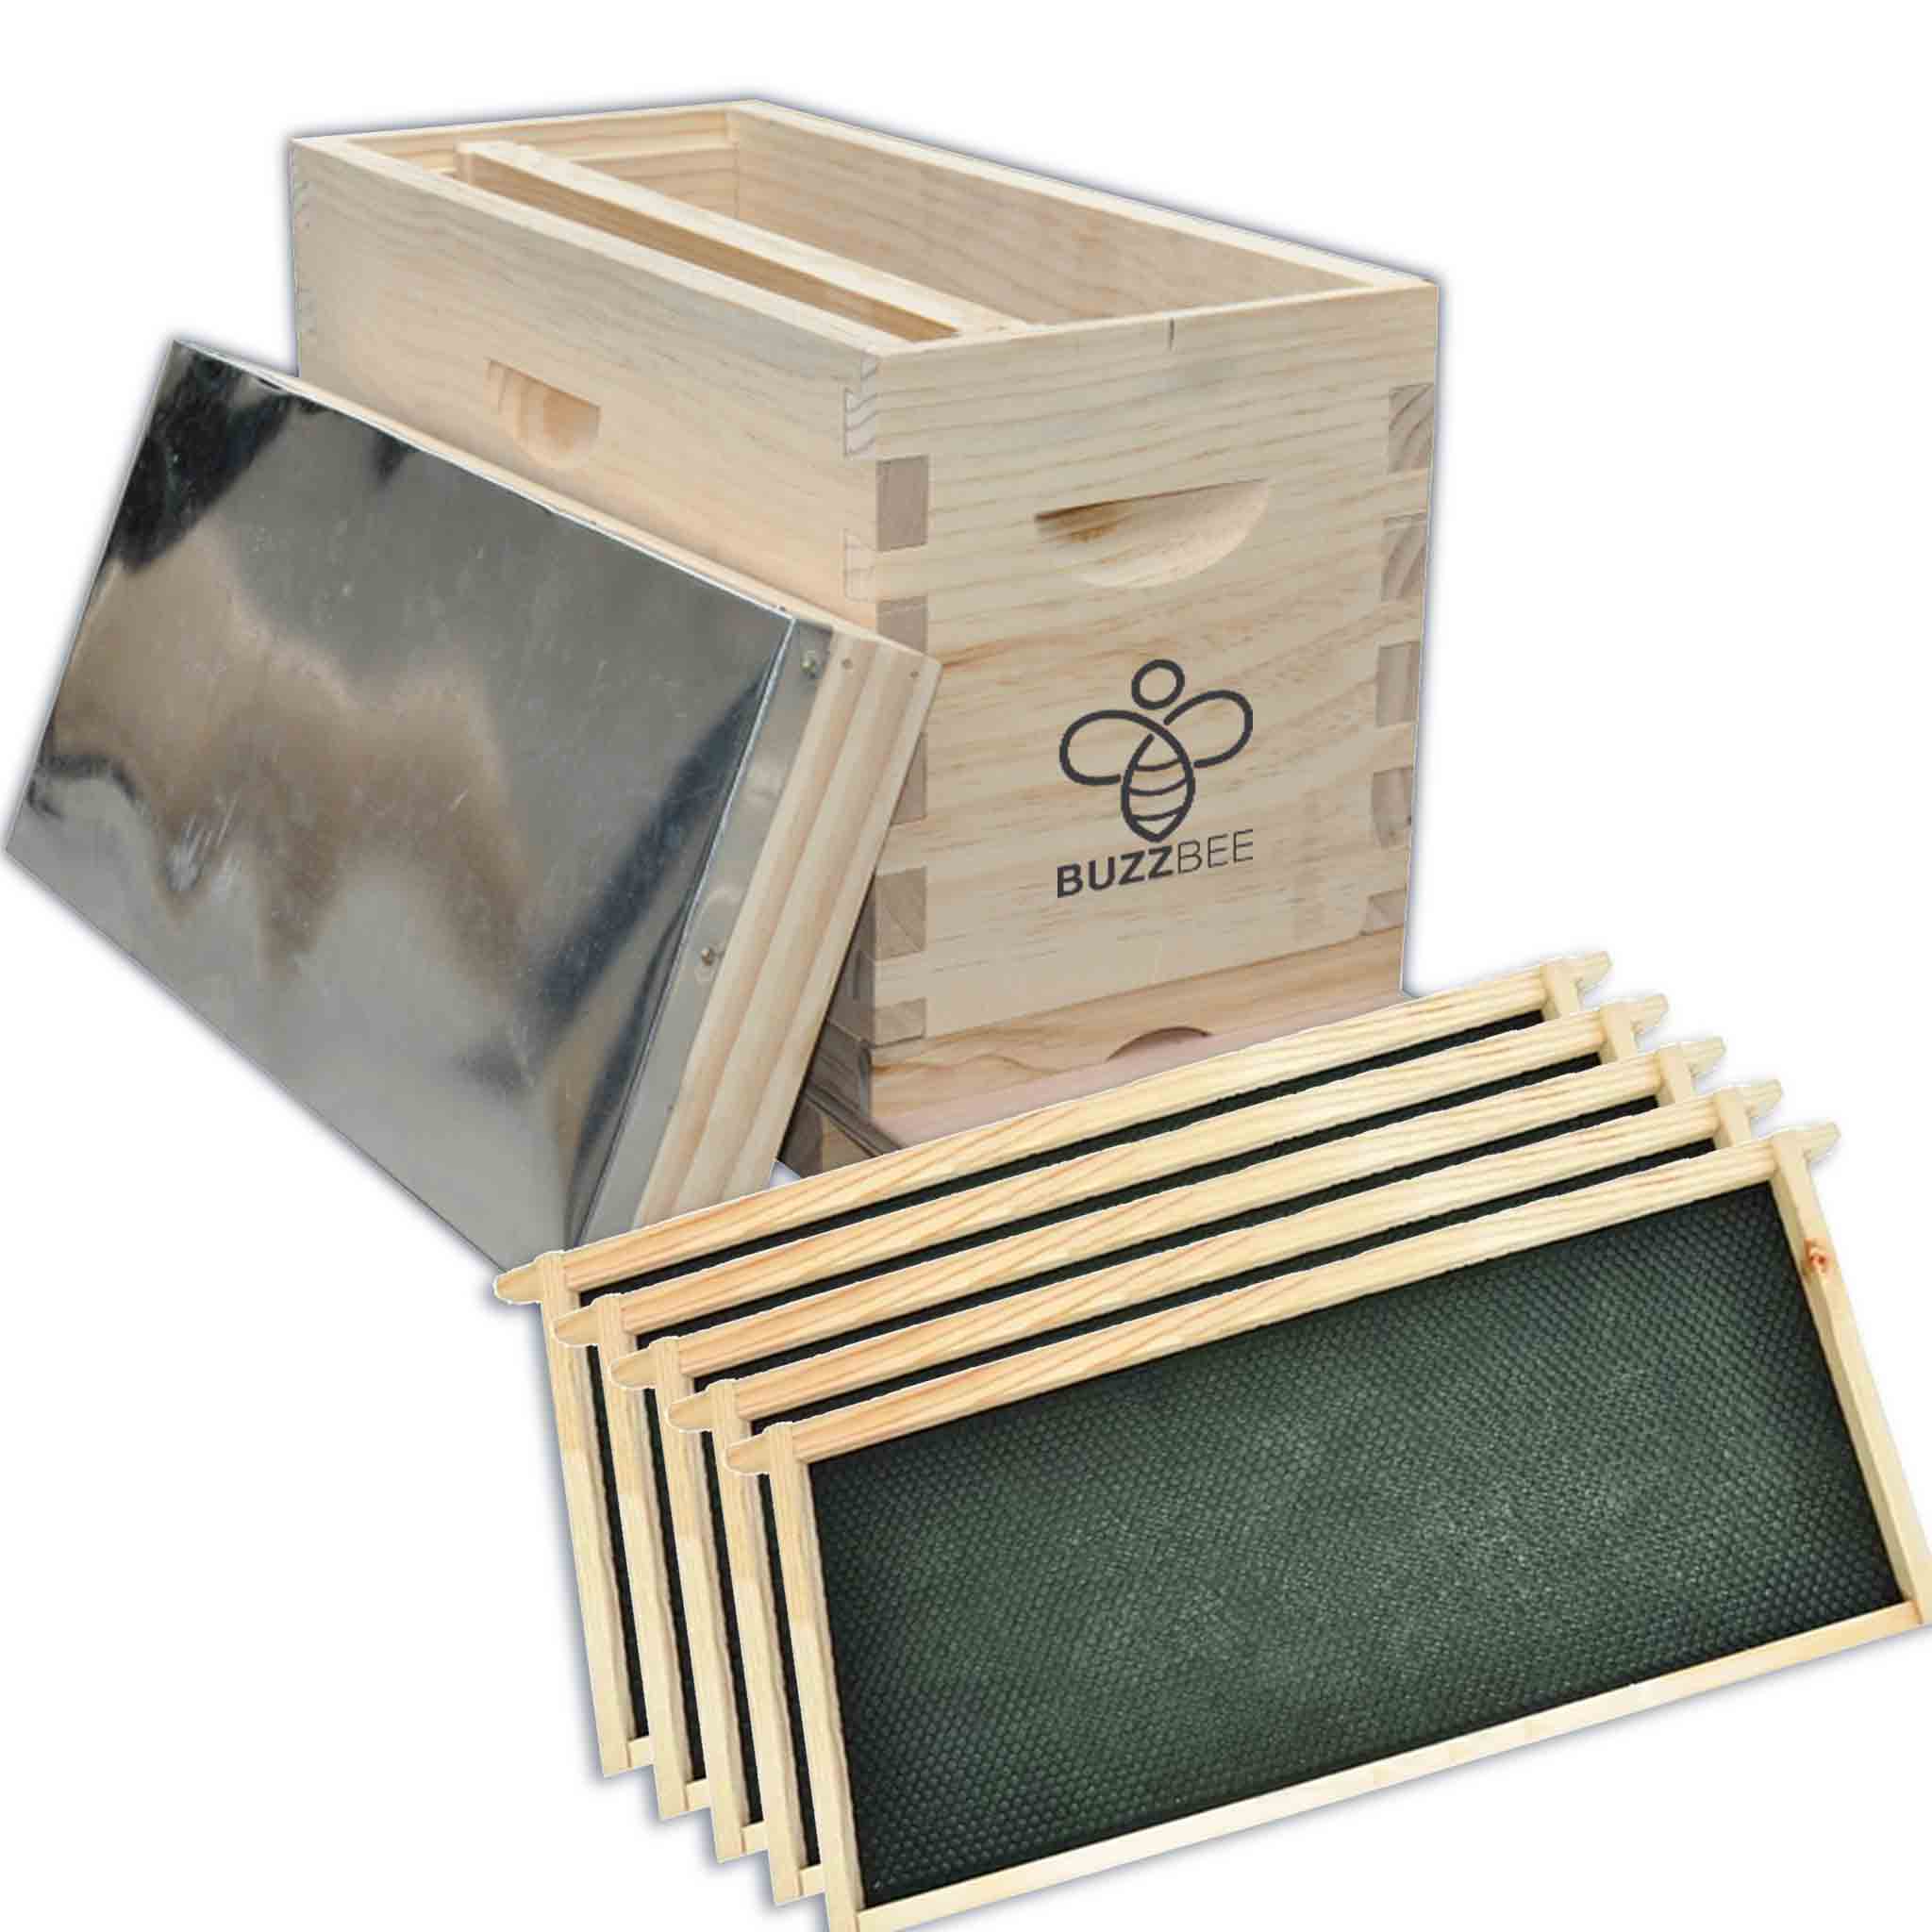 Buzzbee NUC Hive (5 Frames) - Hives collection by Buzzbee Beekeeping Supplies